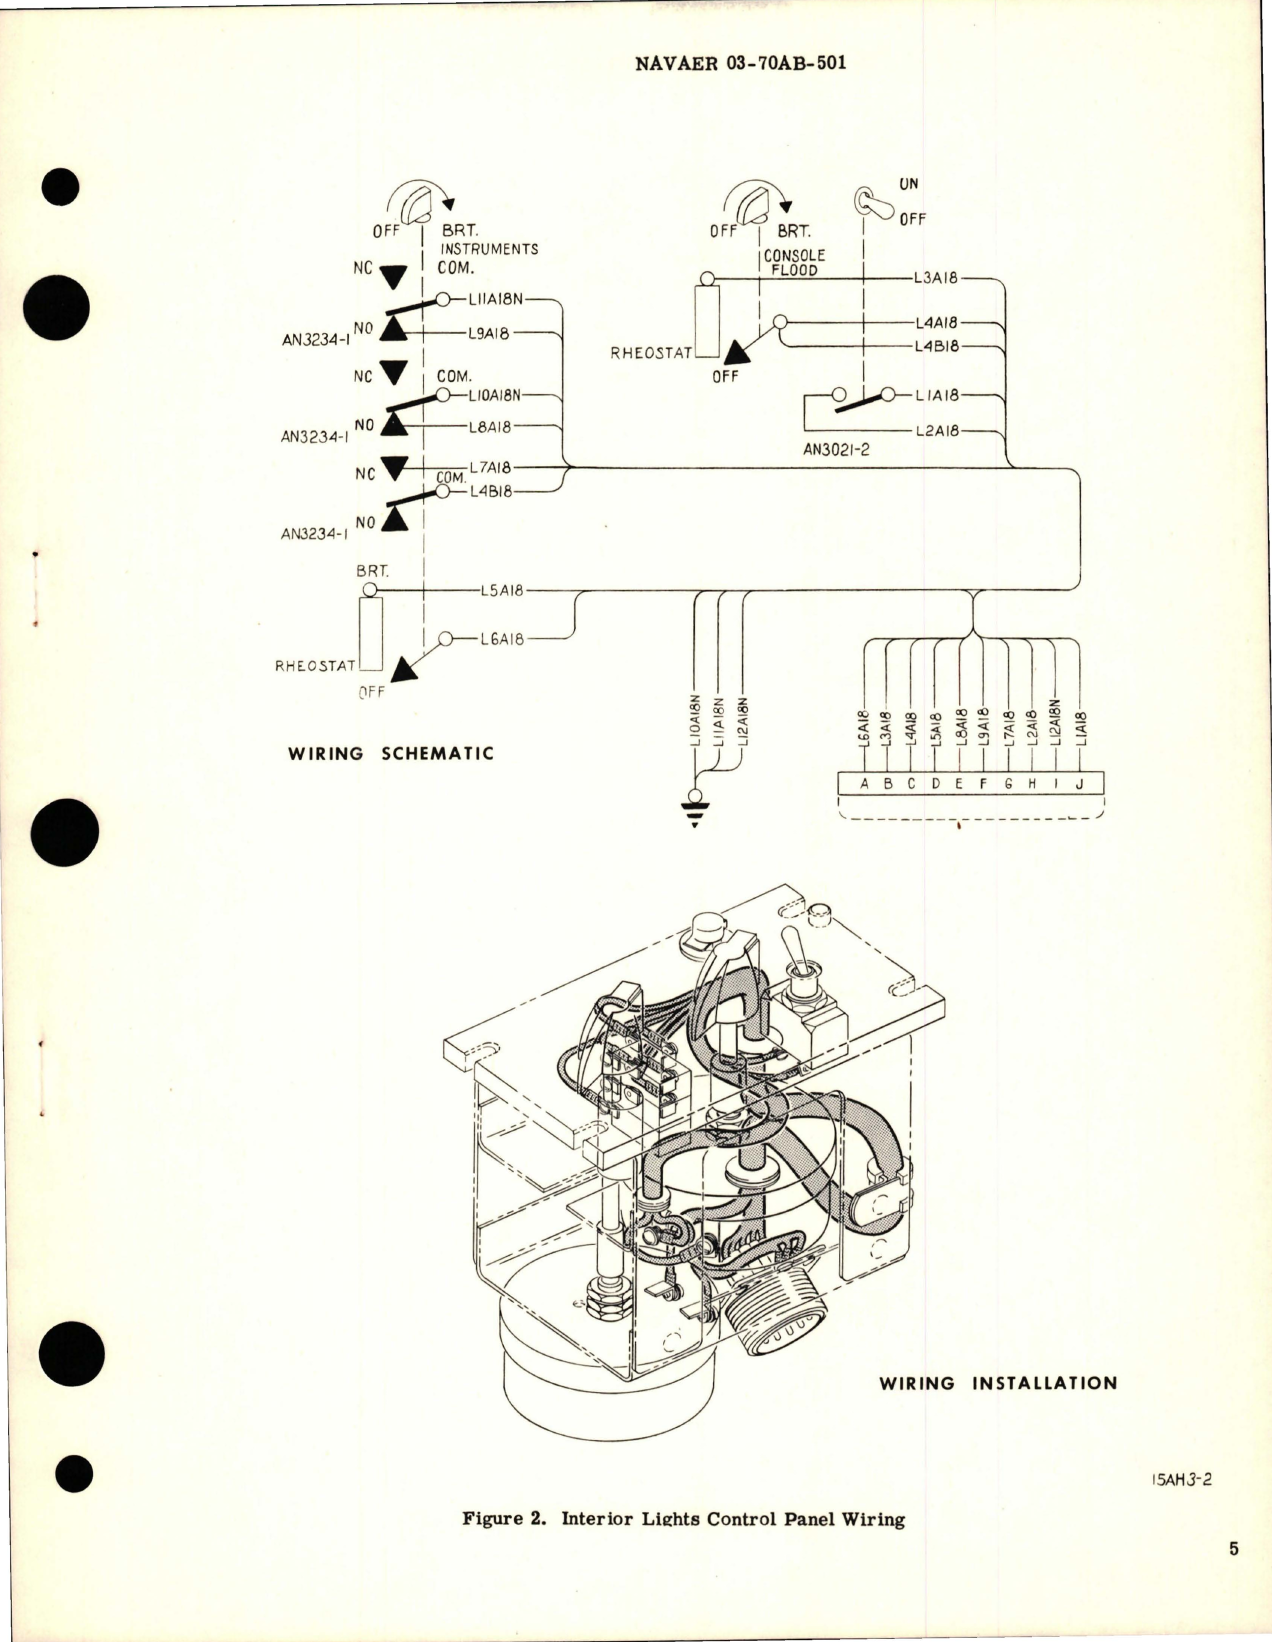 Sample page 5 from AirCorps Library document: Overhaul Instructions with Parts Breakdown for Interior Lights Control Panel - 15-60167-1 and 15-60167-3